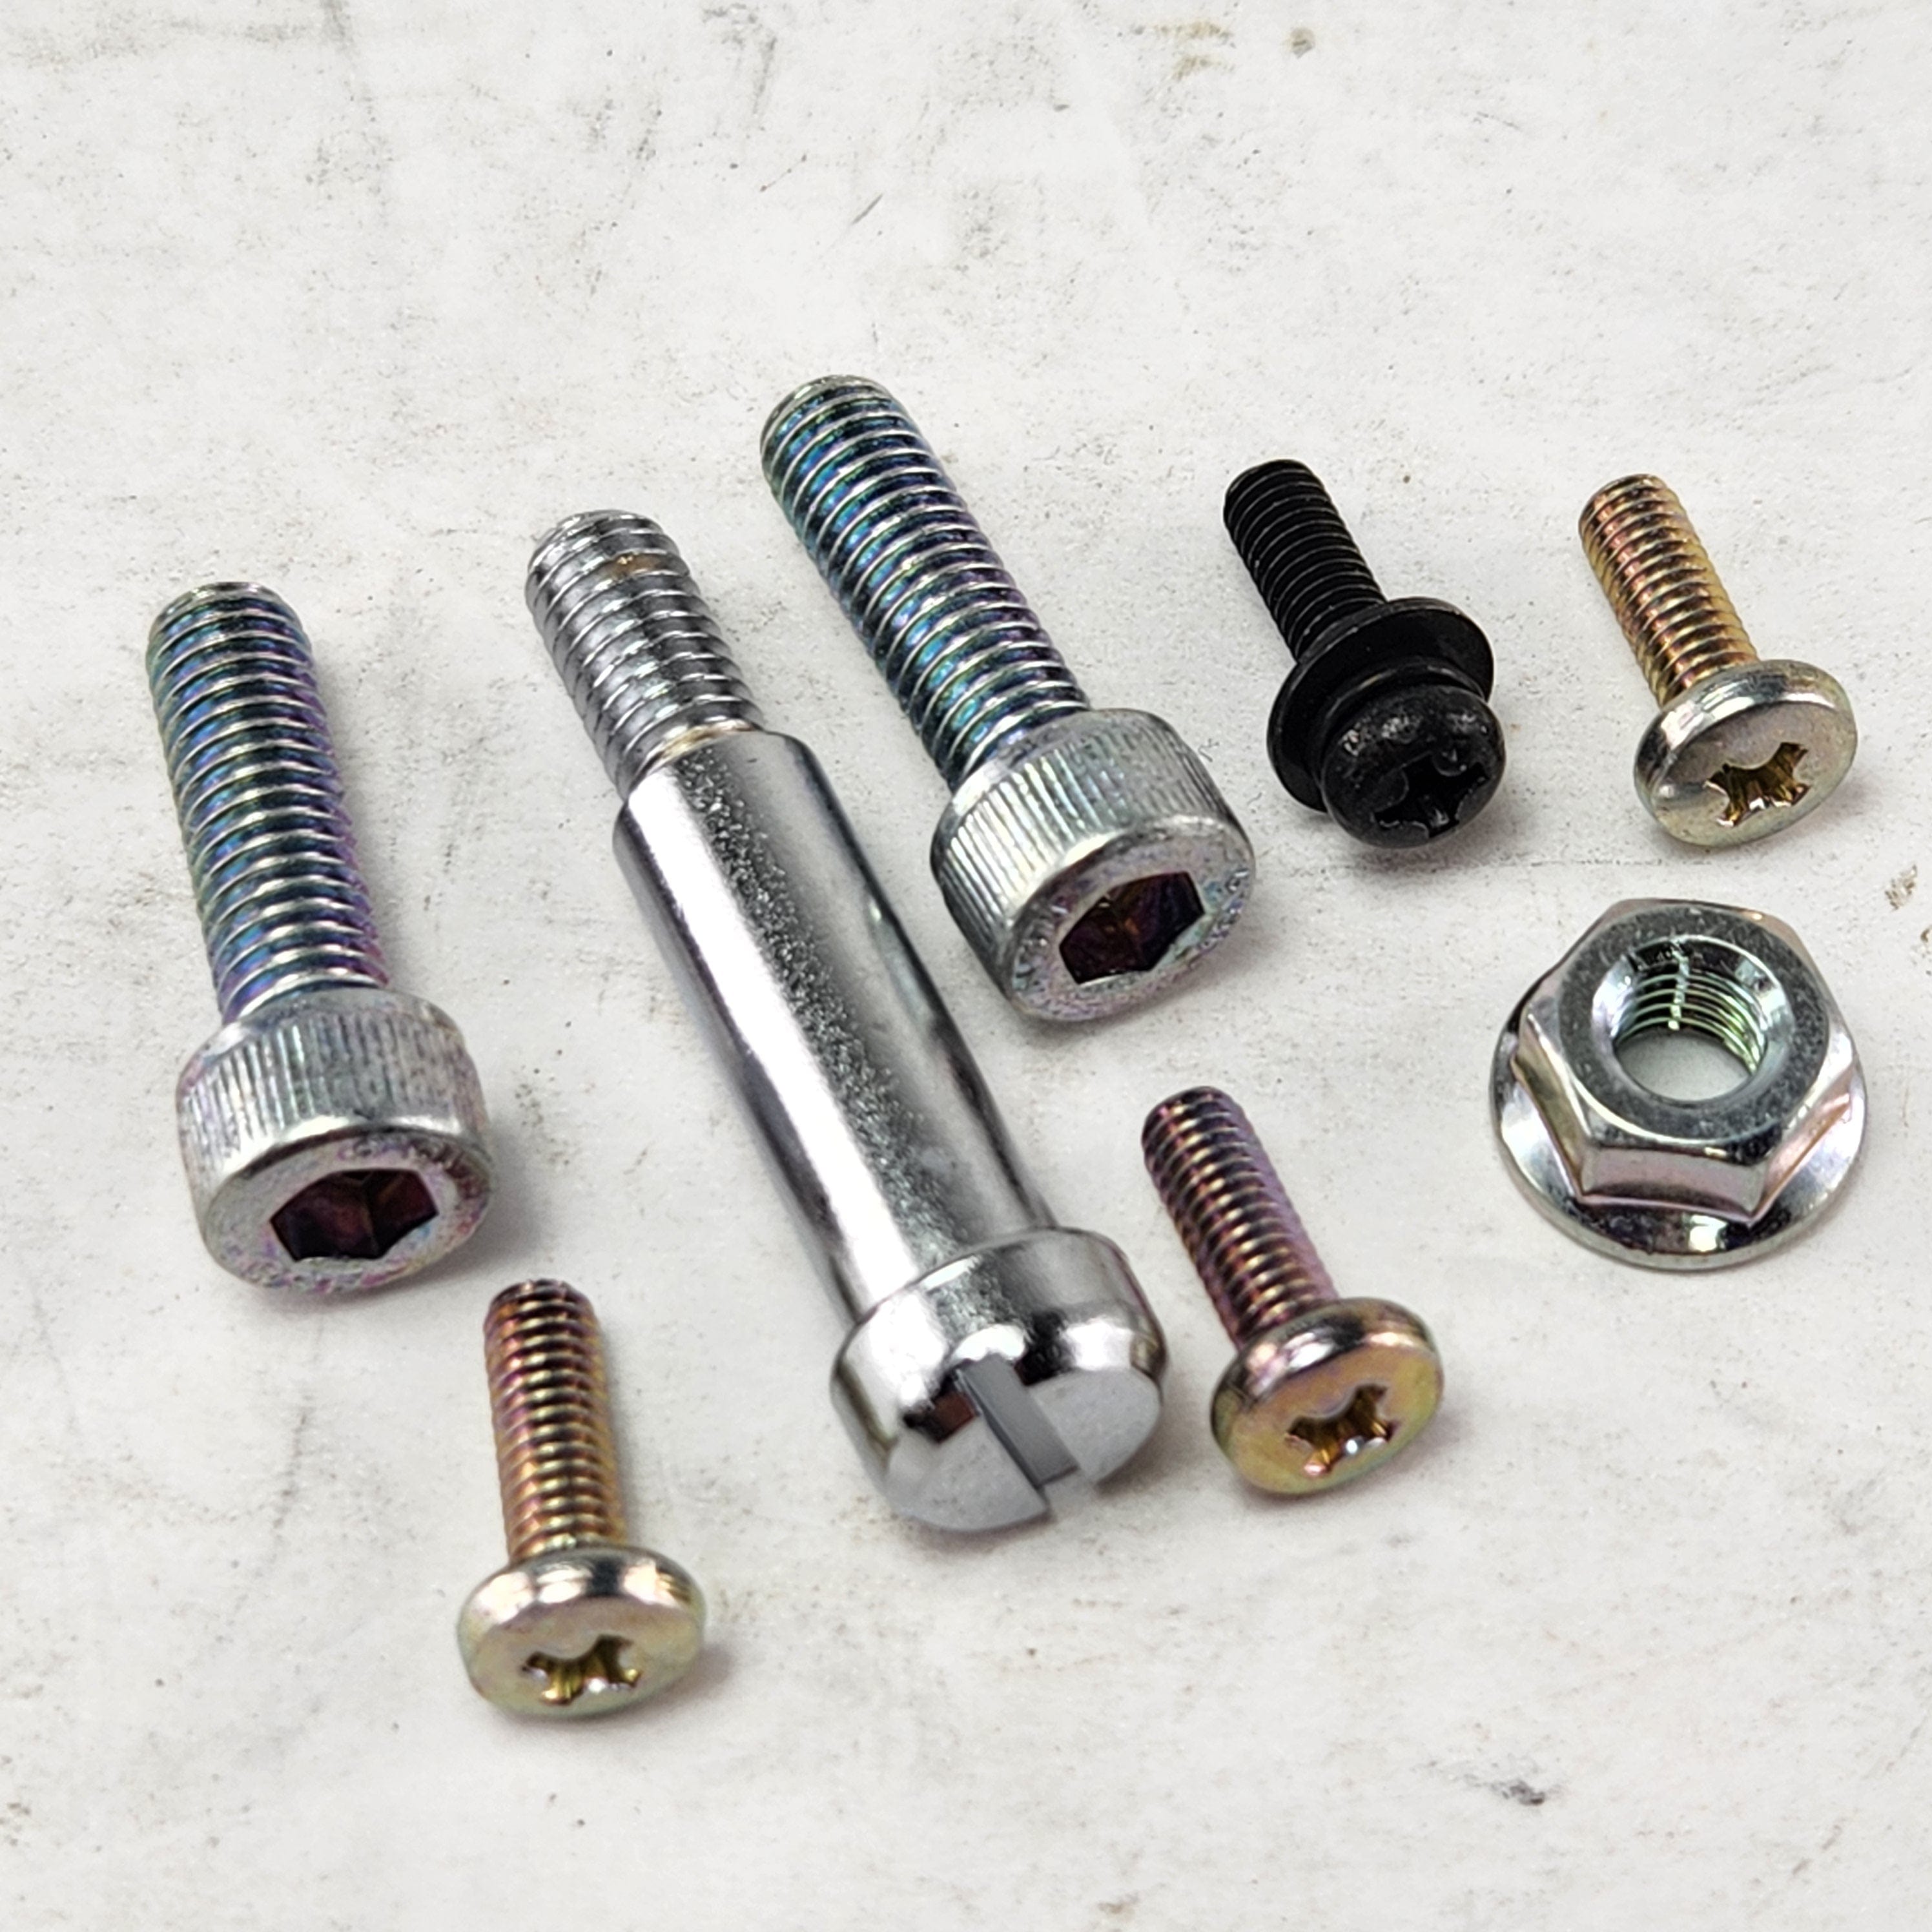 Off Road Express OEM Hardware Kit, Hardware, Brake, M/C, Front [Incl. Fasteners From 3,4,5,6] by Polaris 2203656